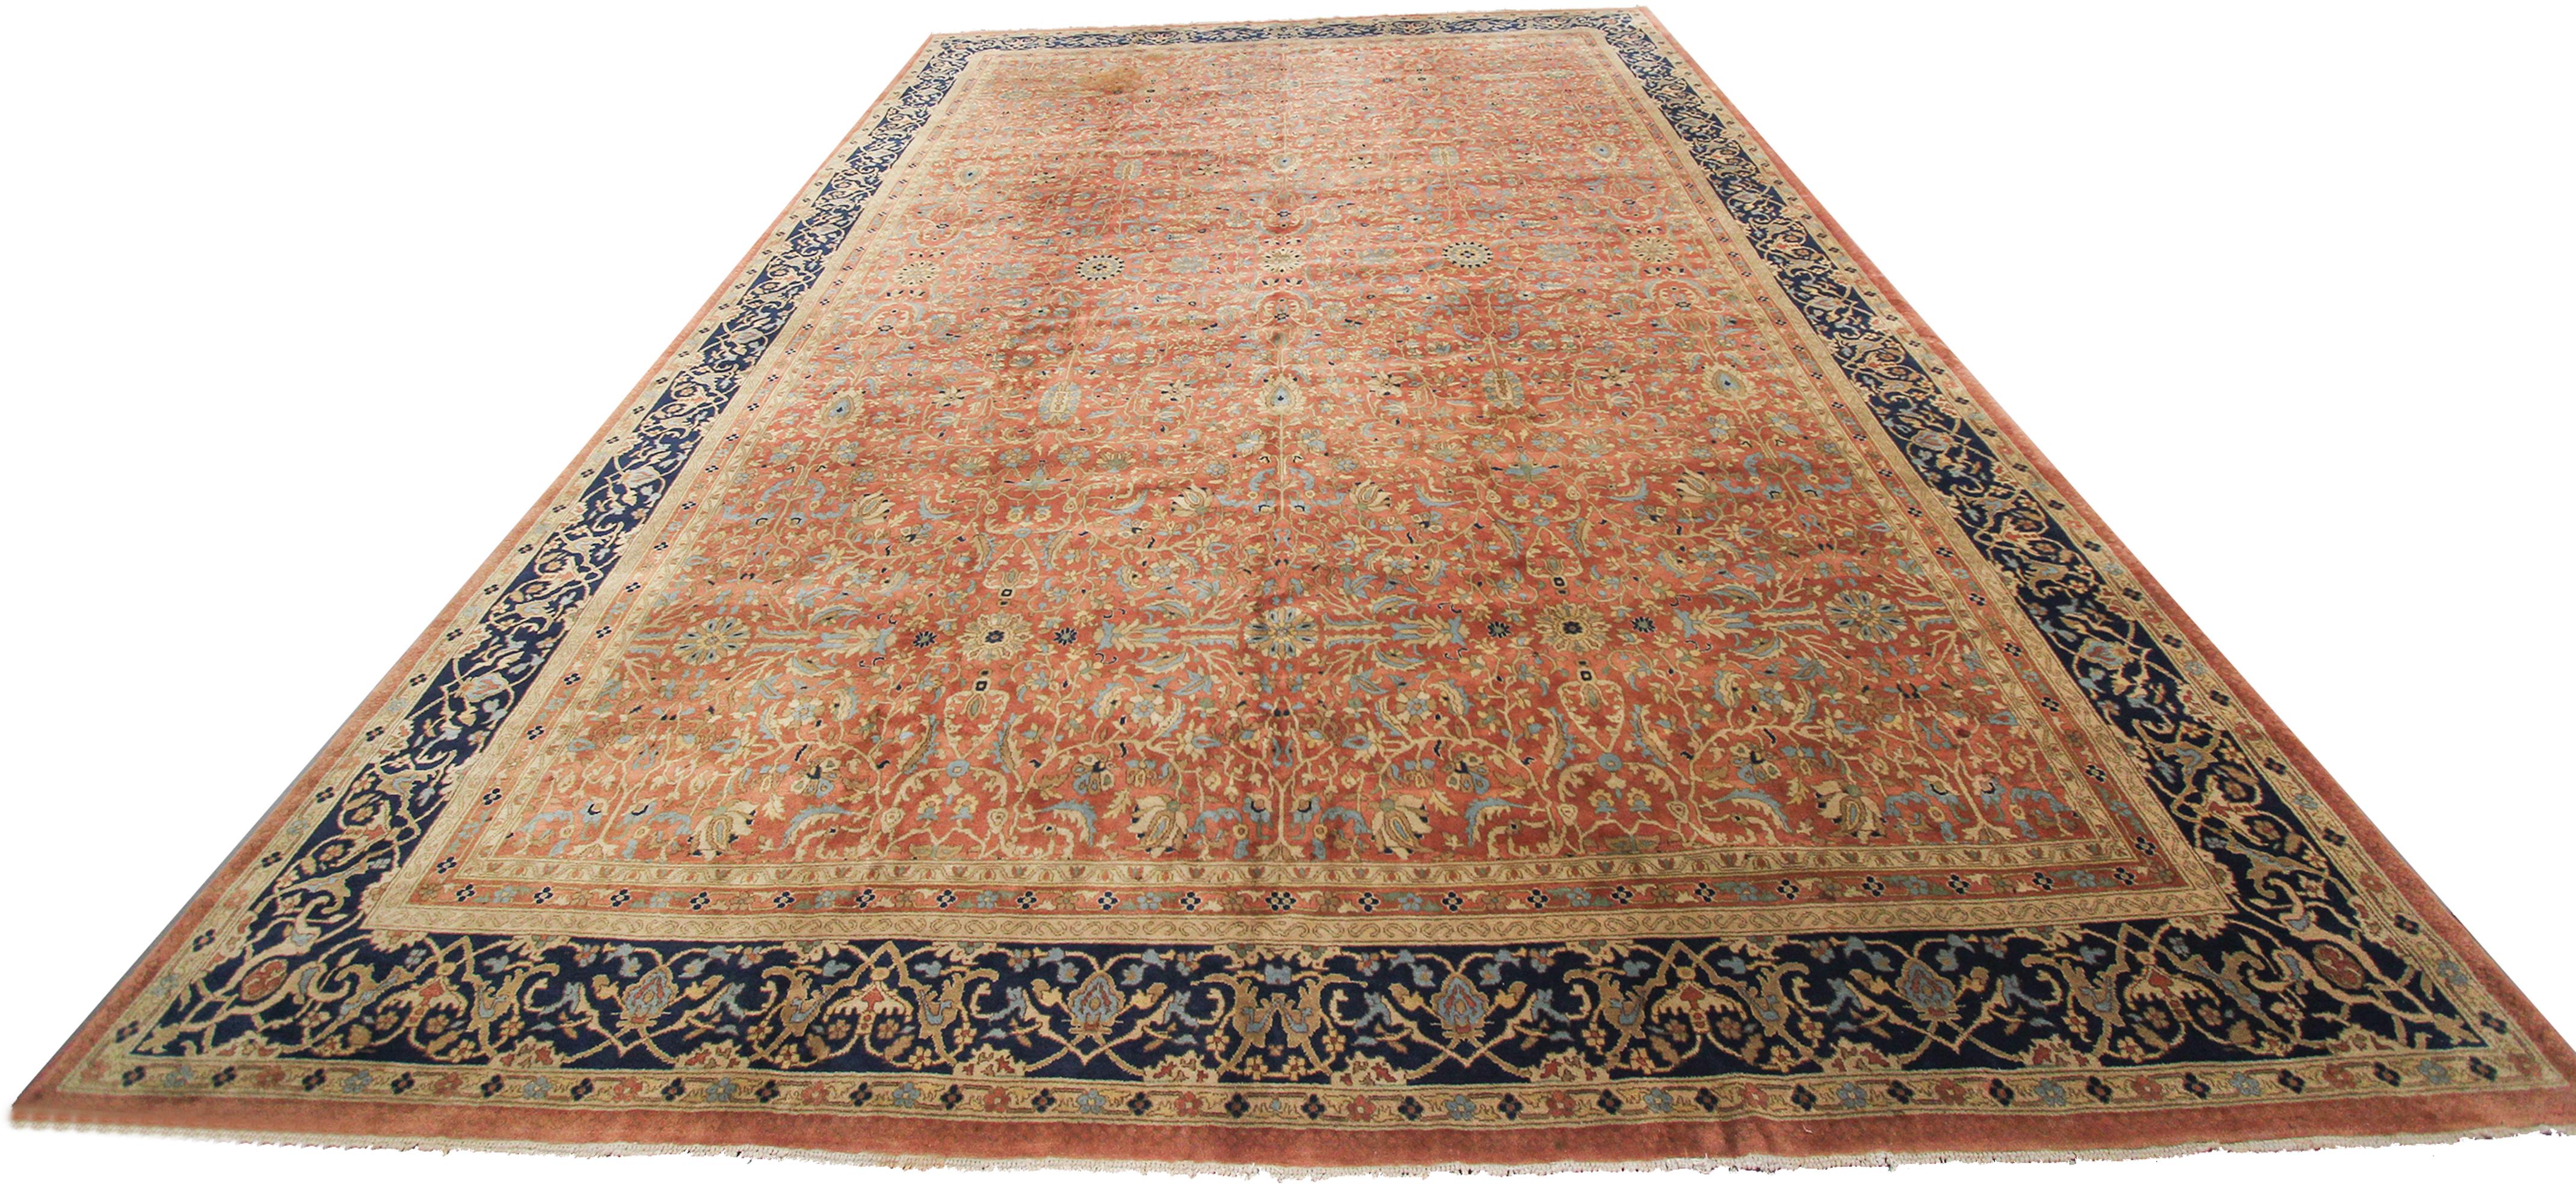 Antique Turkish Oushak Sivas Fine Geometric Overall Rug 11x16 1900 328cm x 457cm In Good Condition For Sale In New York, NY